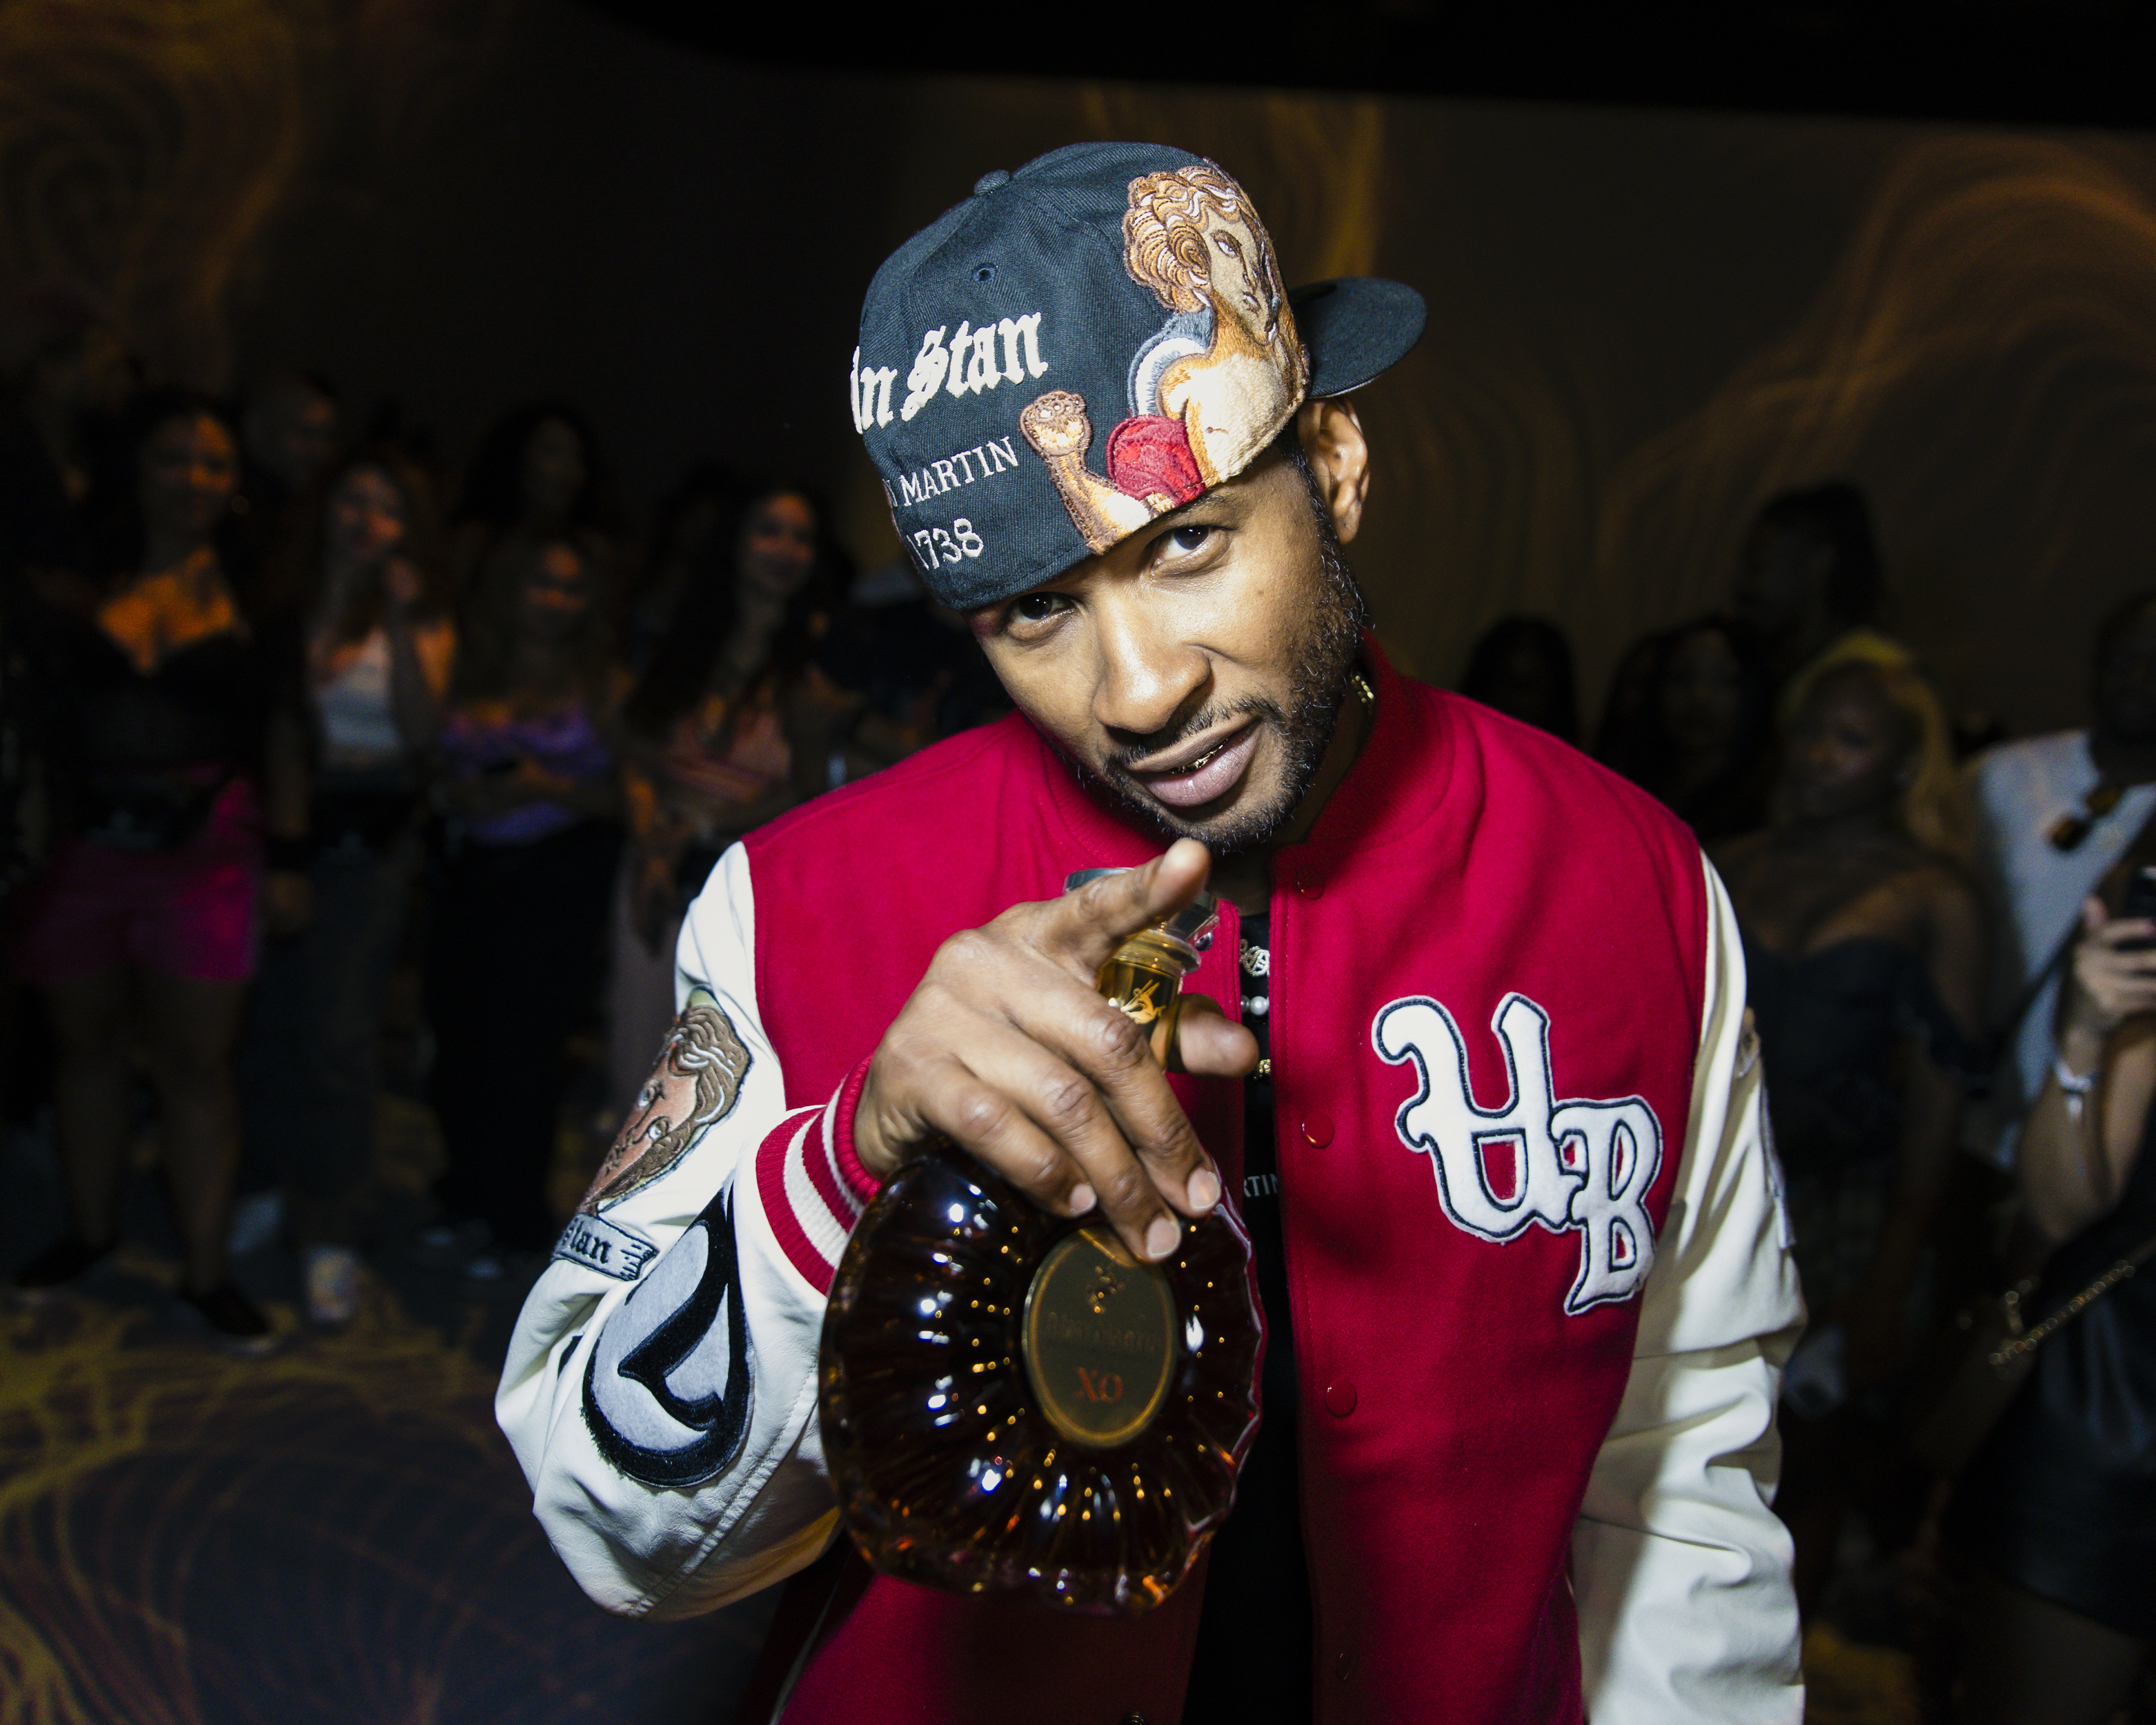 Usher at a party holding a bottle of liquor and pointing at the camera